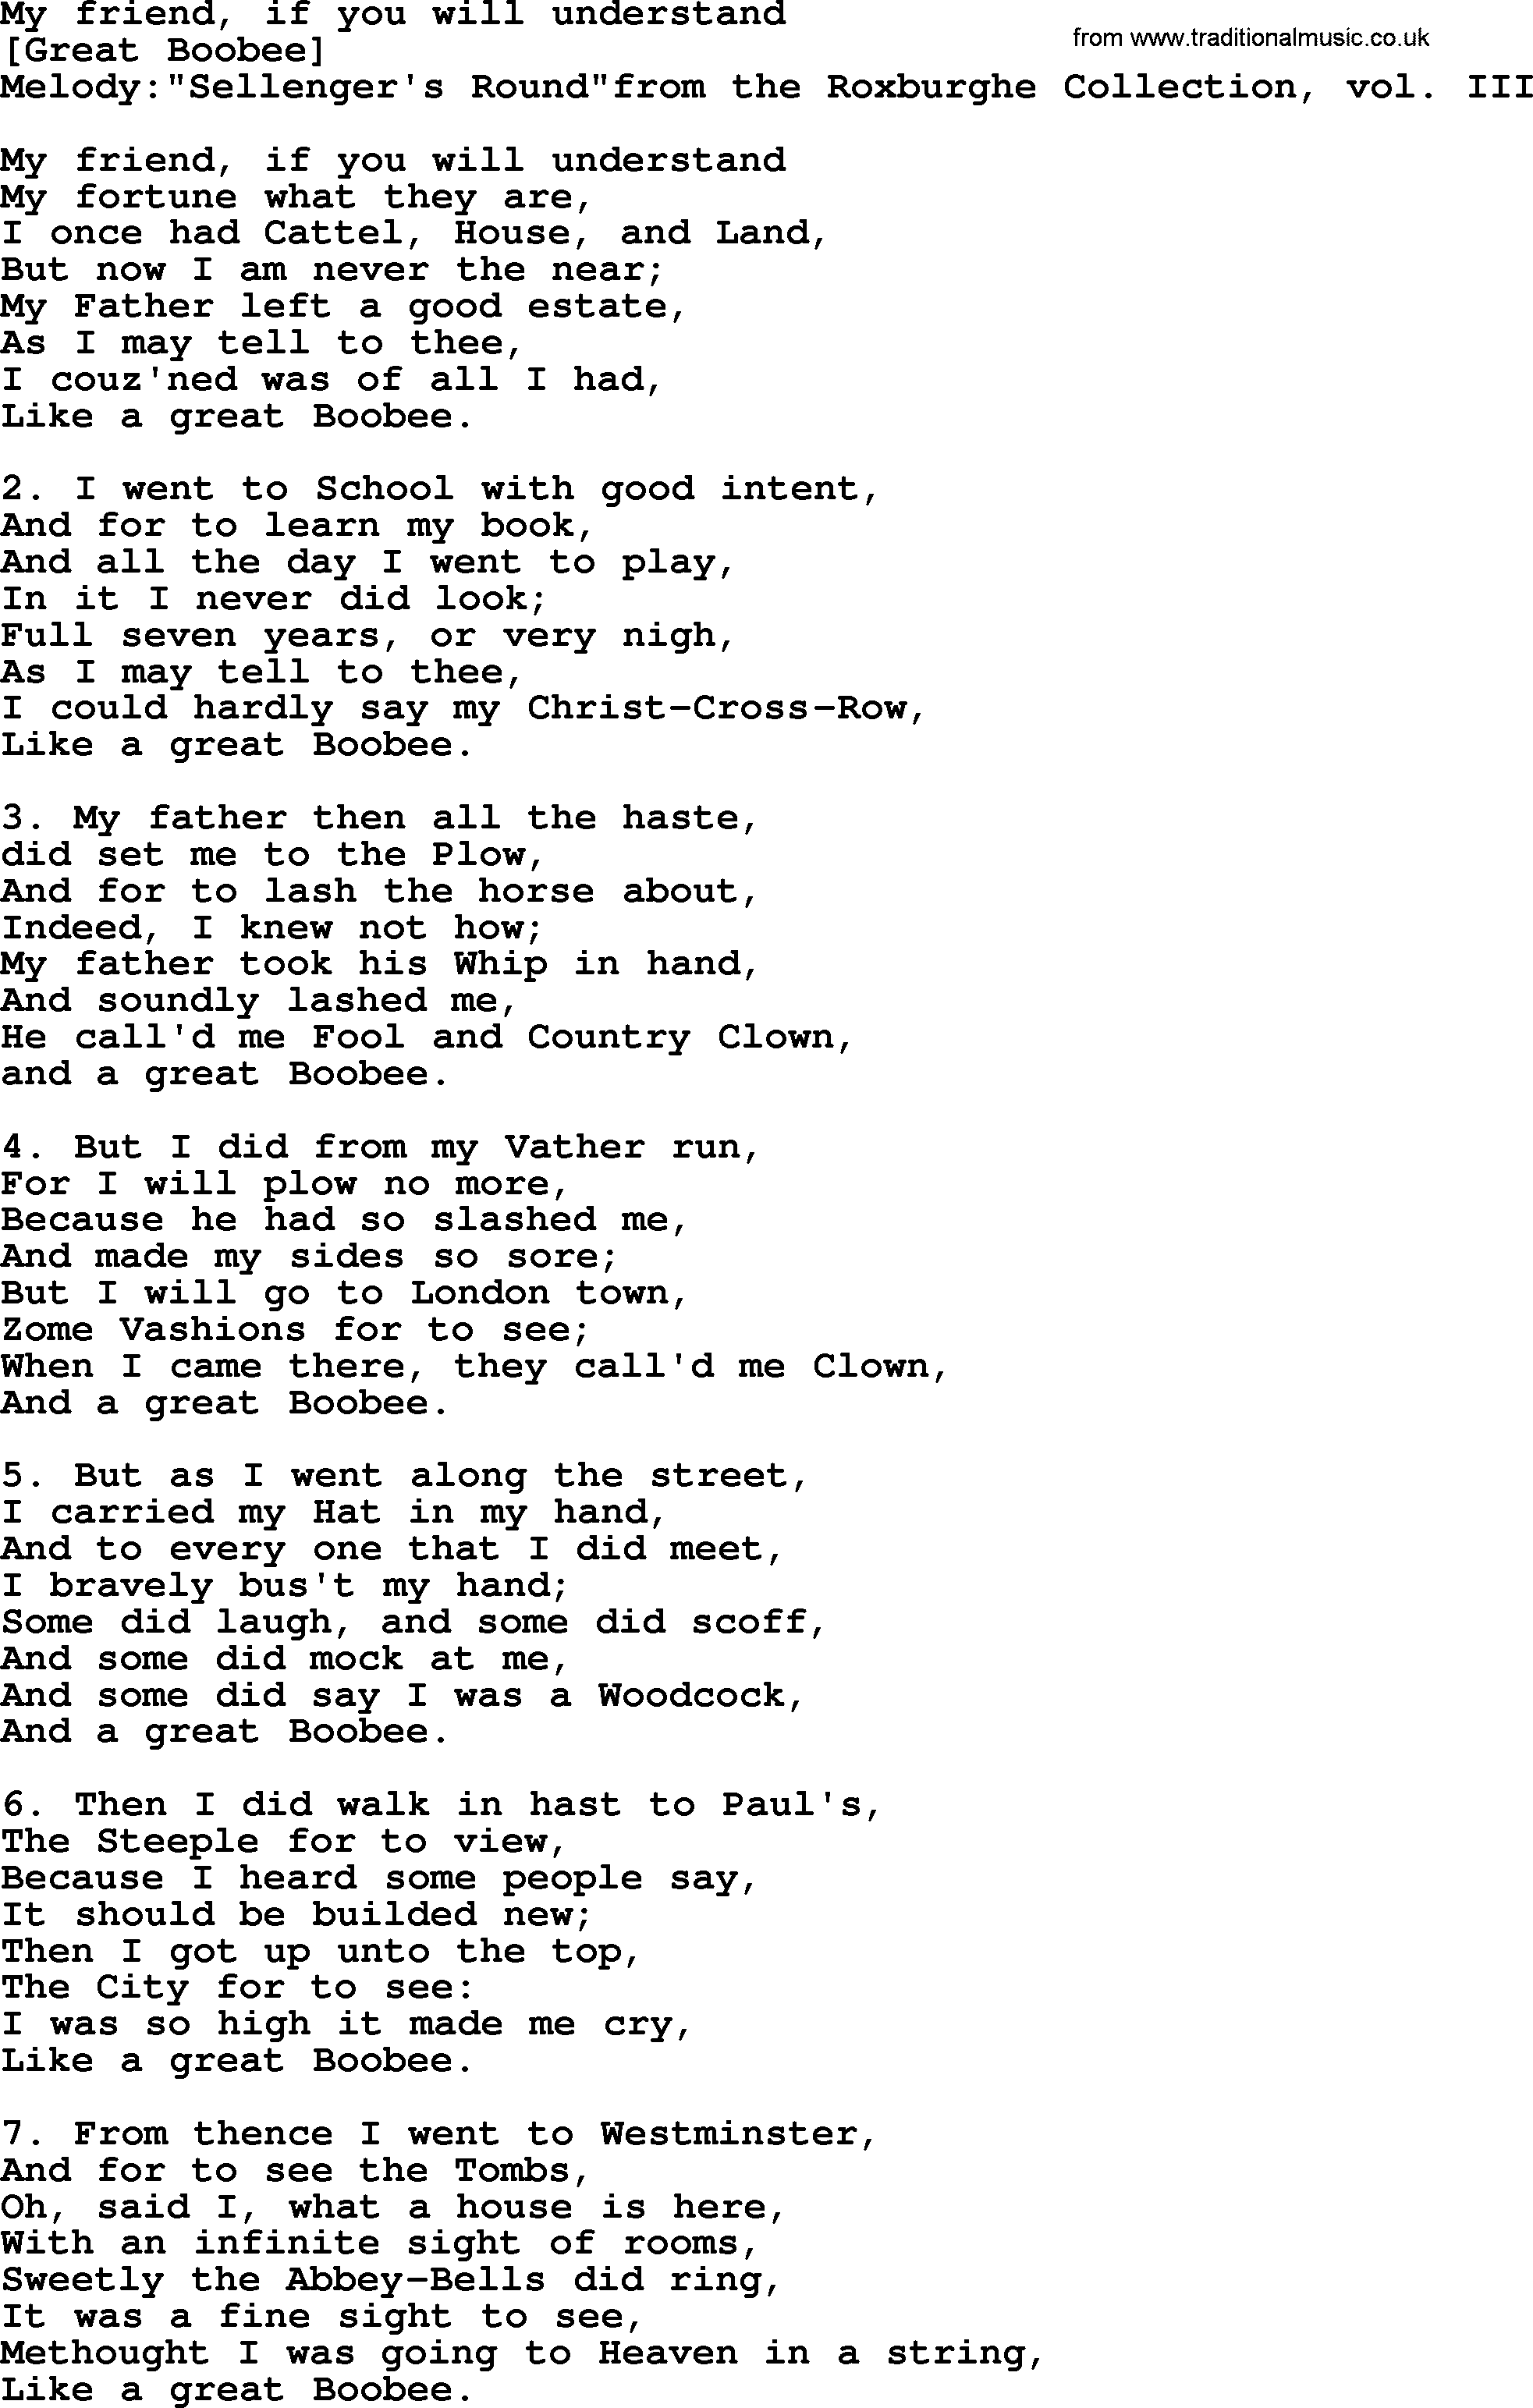 Old English Song: My Friend, If You Will Understand lyrics